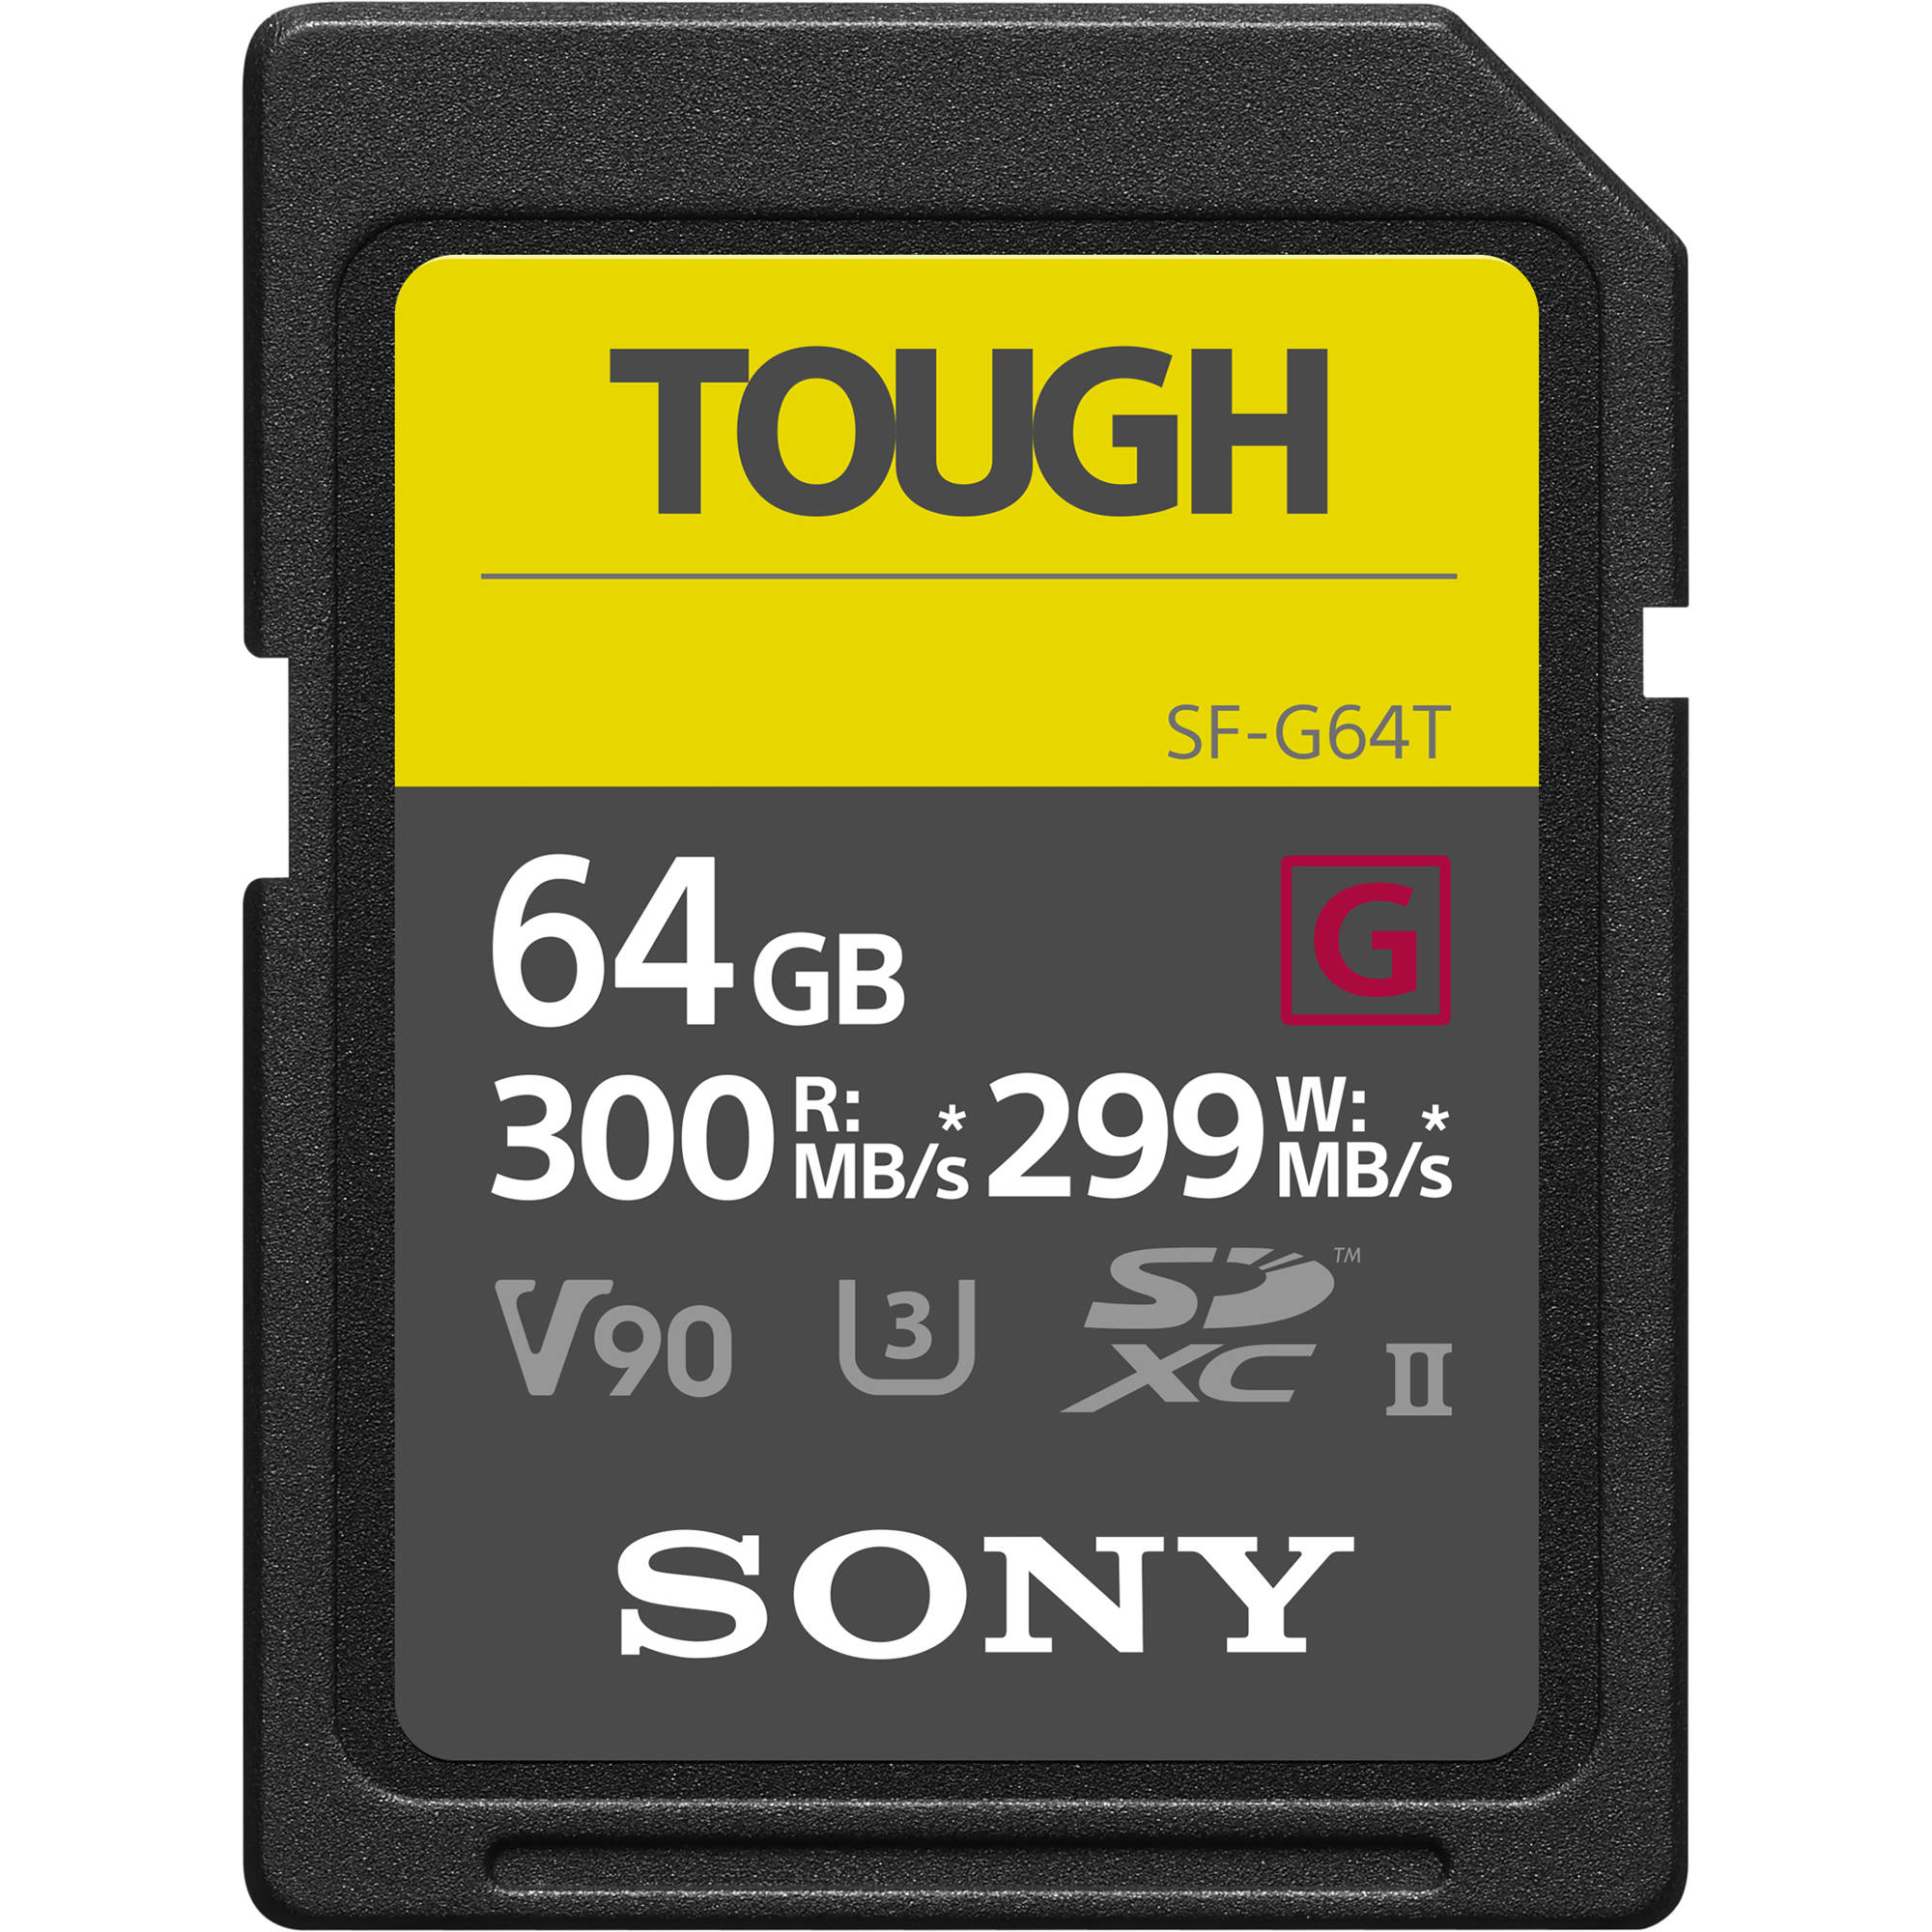 TThumbnail image for Sony 64GB SF-G Tough Series UHS-II SDXC Memory Card